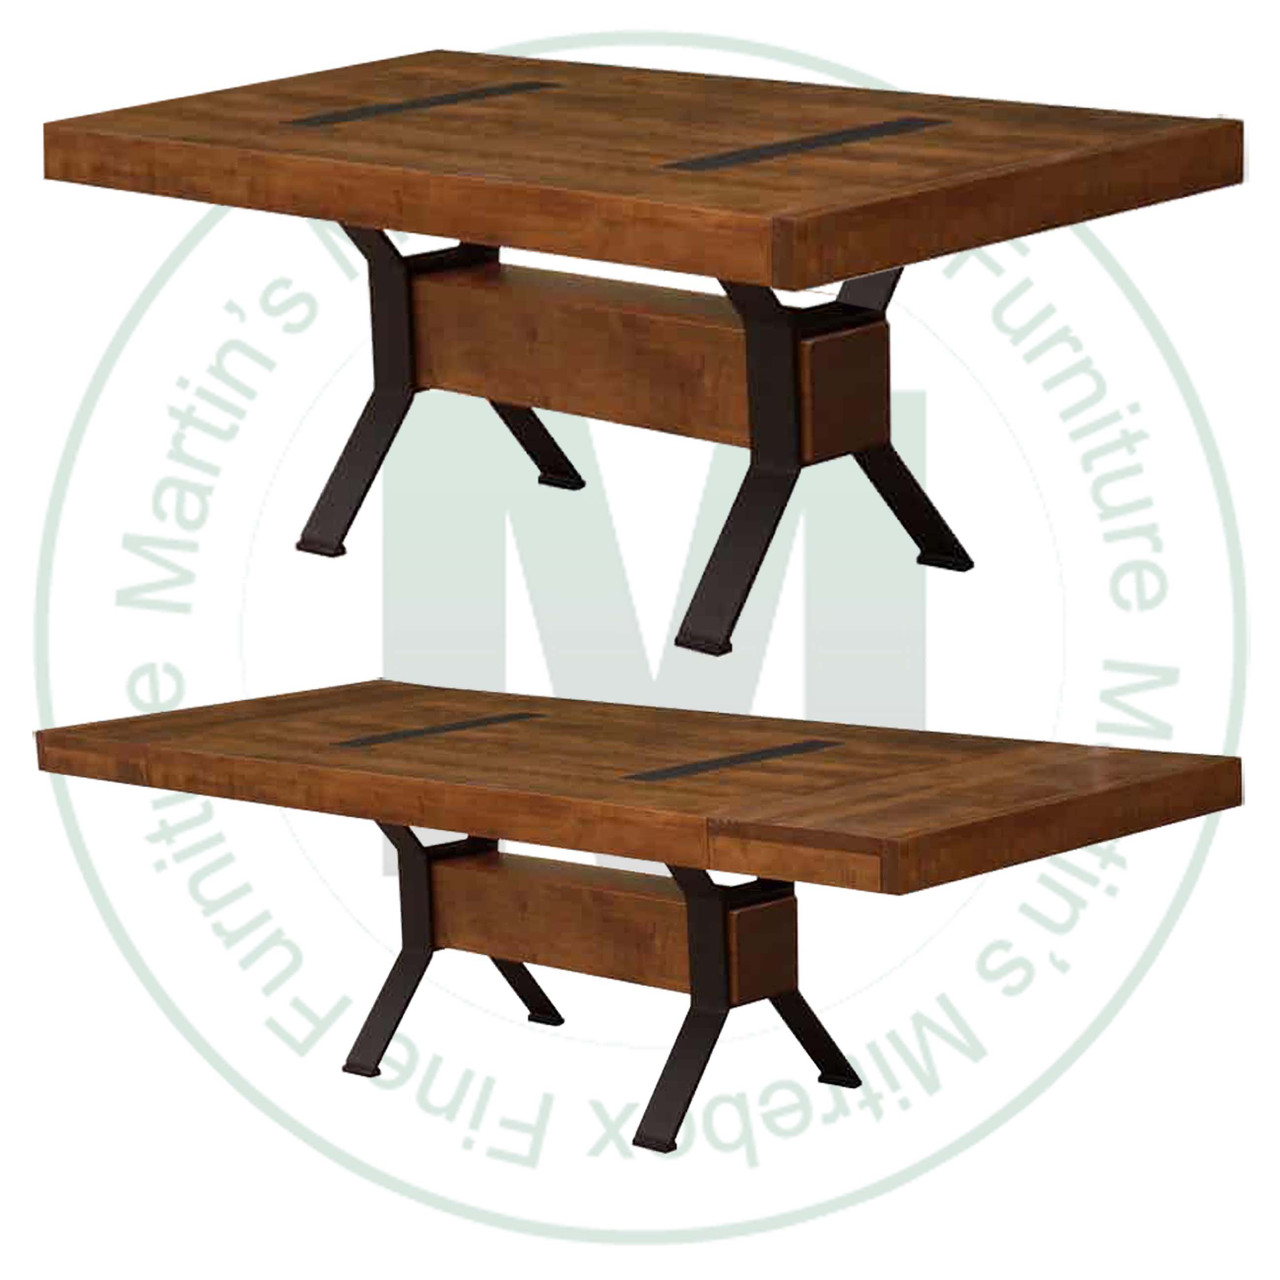 Oak Millwright Solid Top Pedestal Table With 2 - 16'' End Leaves 36'' Deep x 72'' Wide x 30'' High